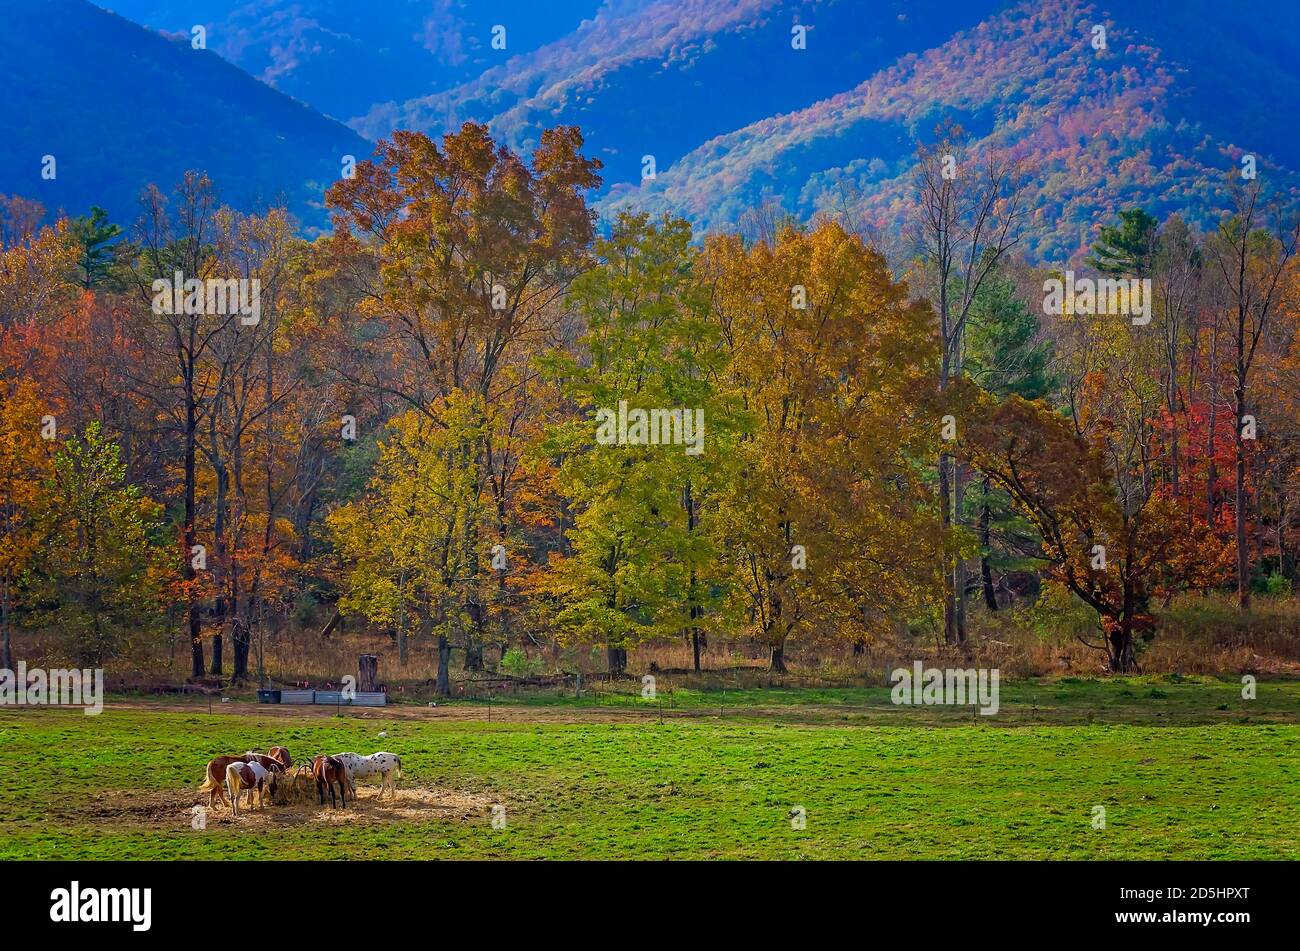 Horses eat hay in Cades Cove at Great Smoky Mountains National Park in Tennessee. Stock Photo